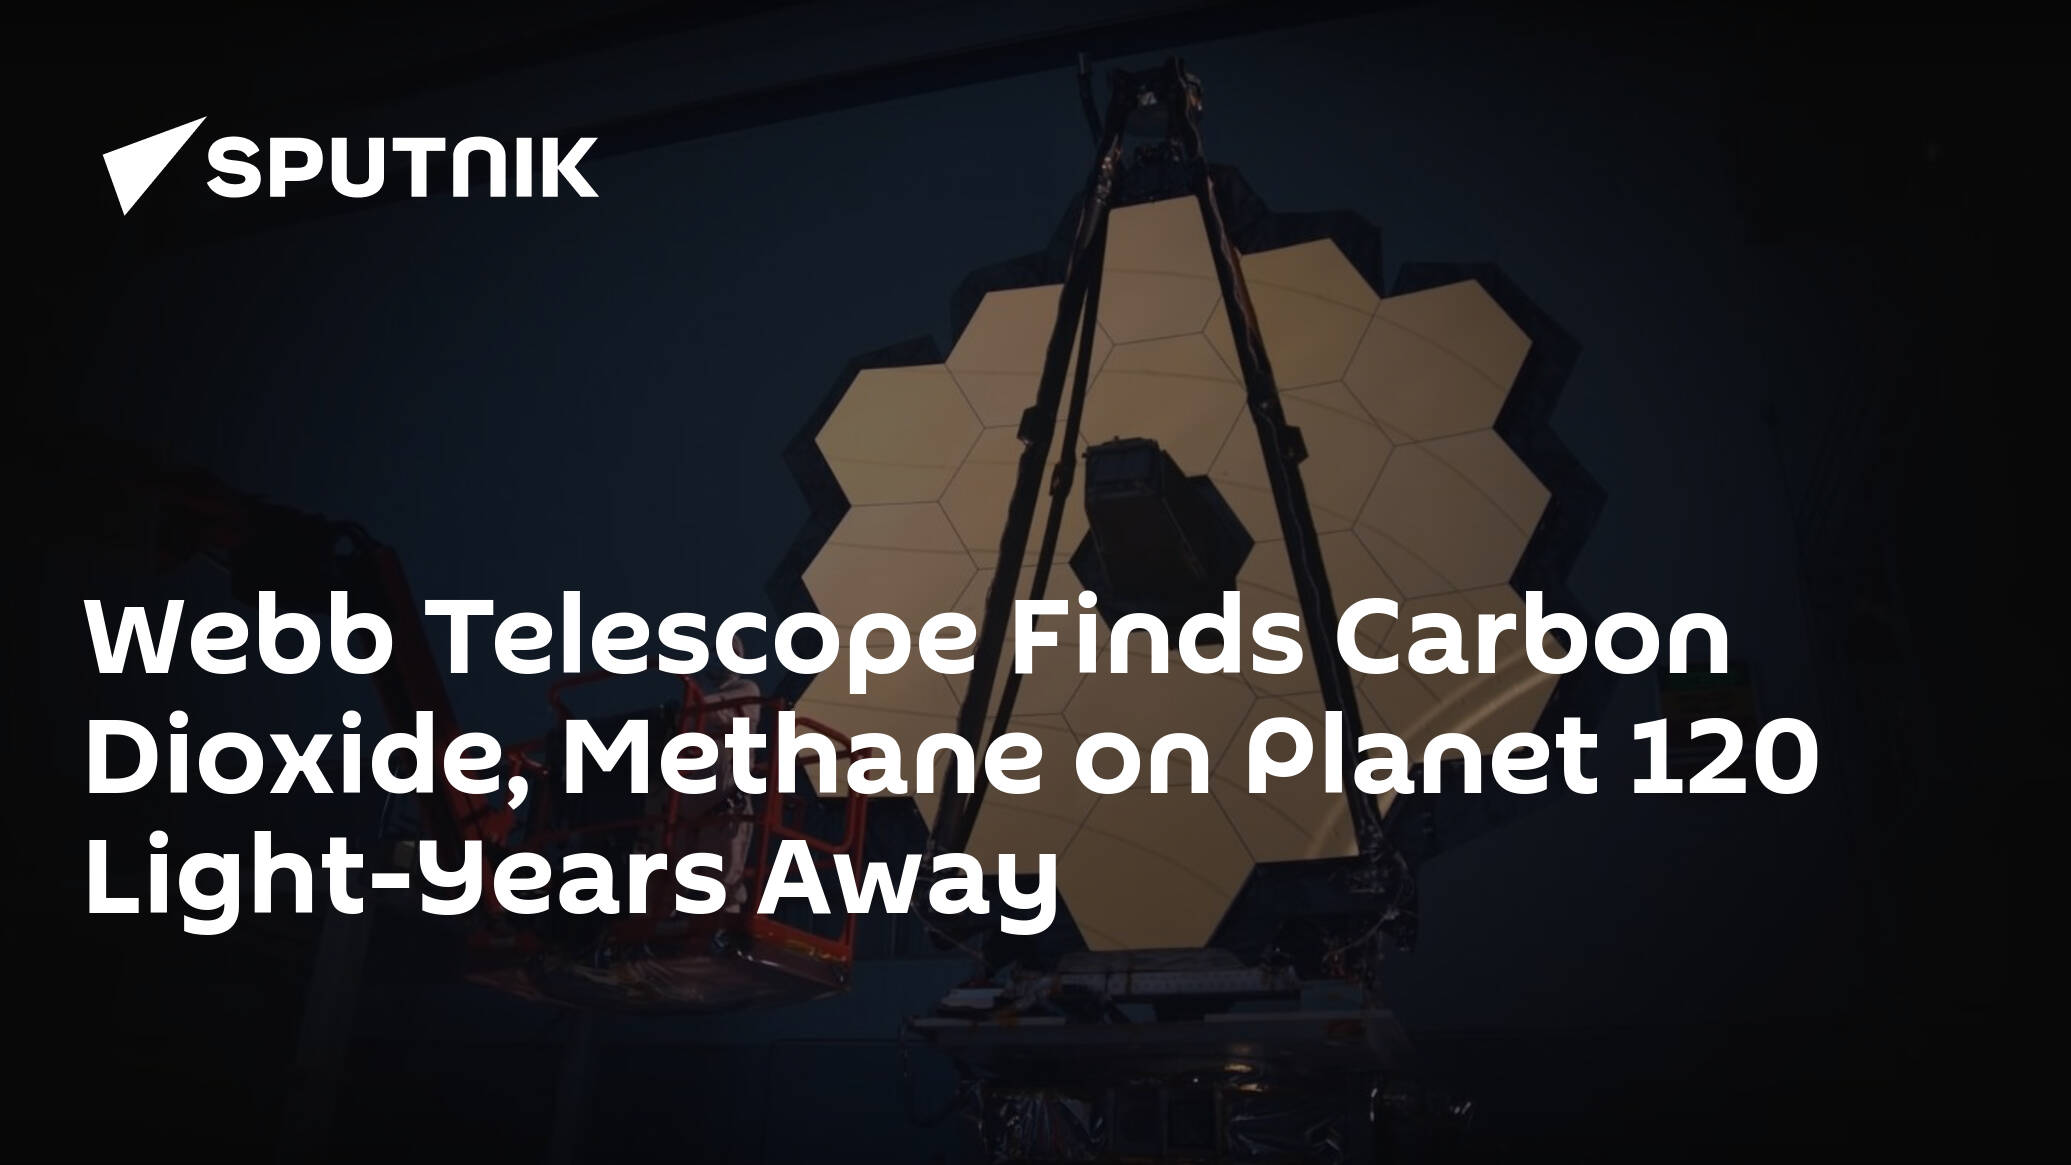 Webb Telescope Finds Carbon Dioxide, Methane on Planet 120 Light-Years Away